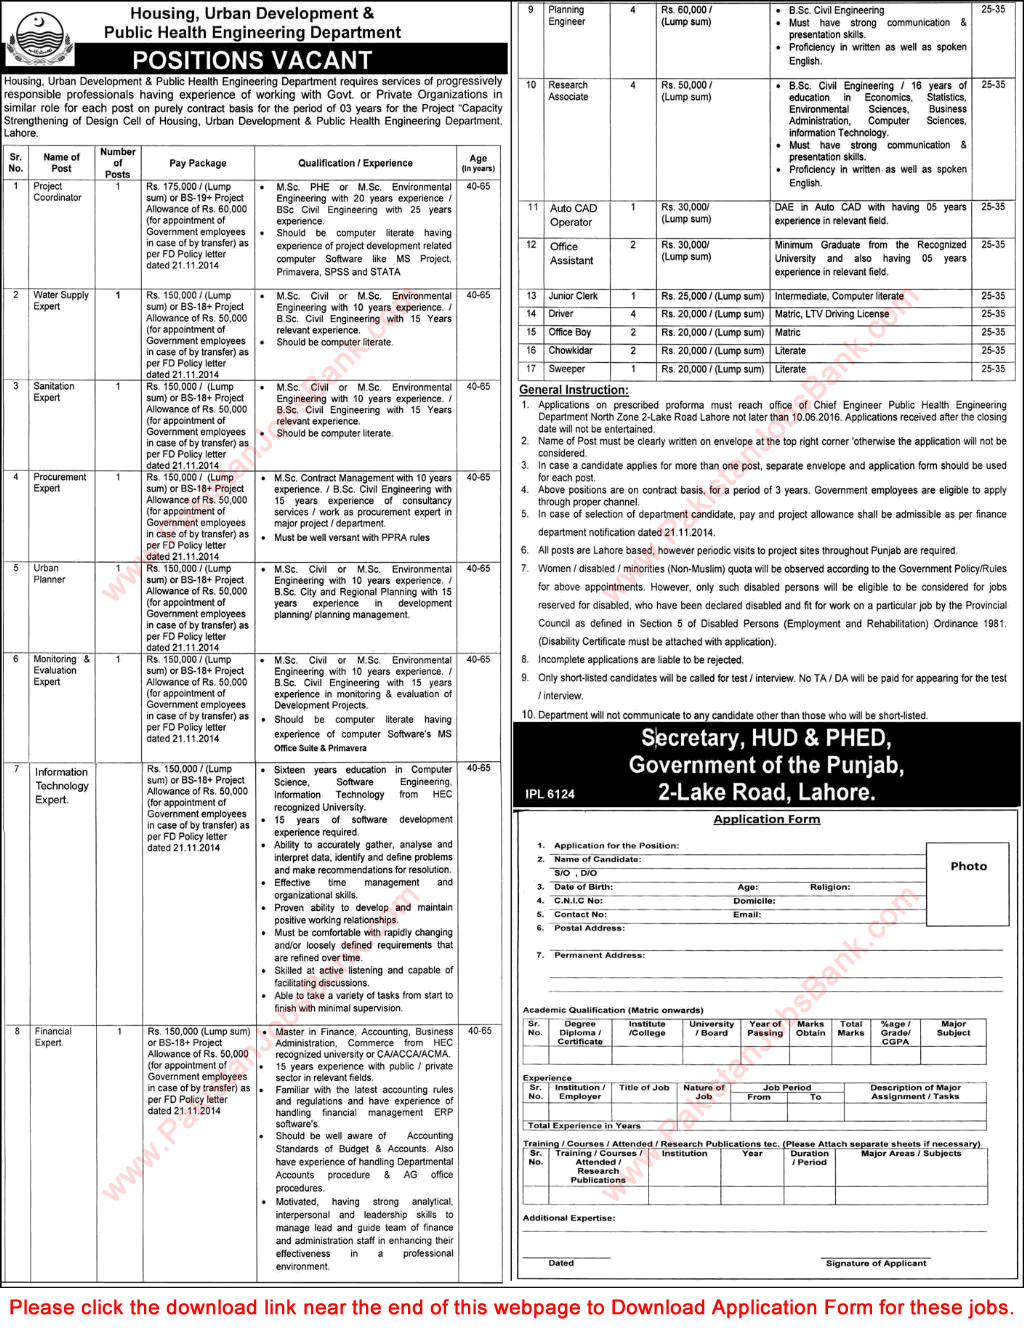 Public Health Engineering Department Punjab Jobs May 2016 Application Form Download Latest